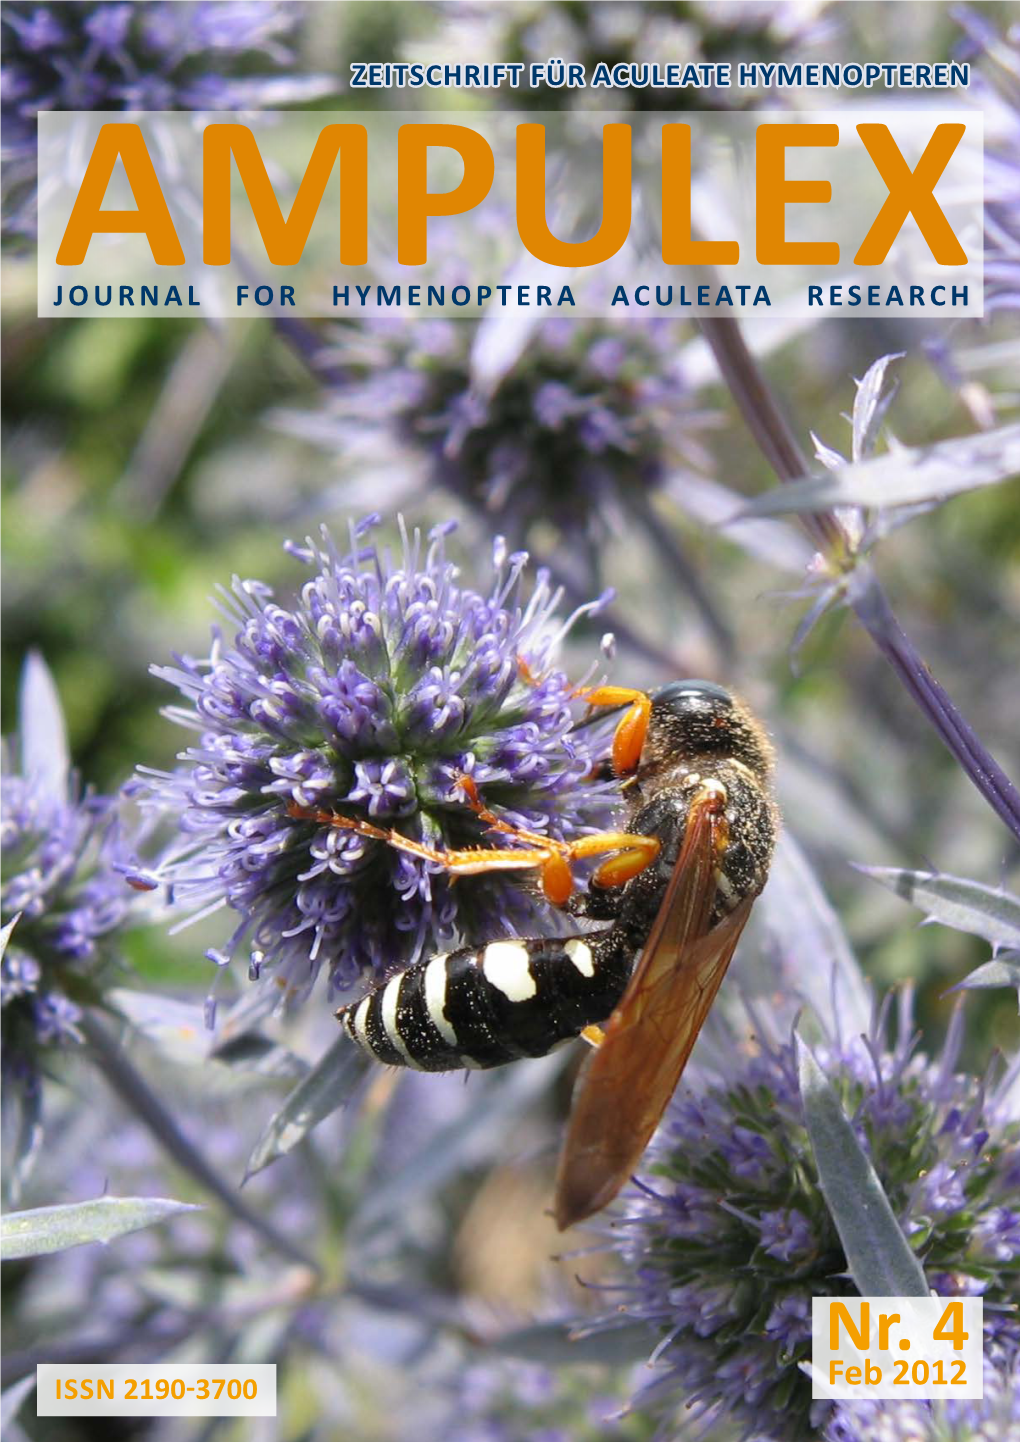 Journal for Hymenoptera Aculeata Research